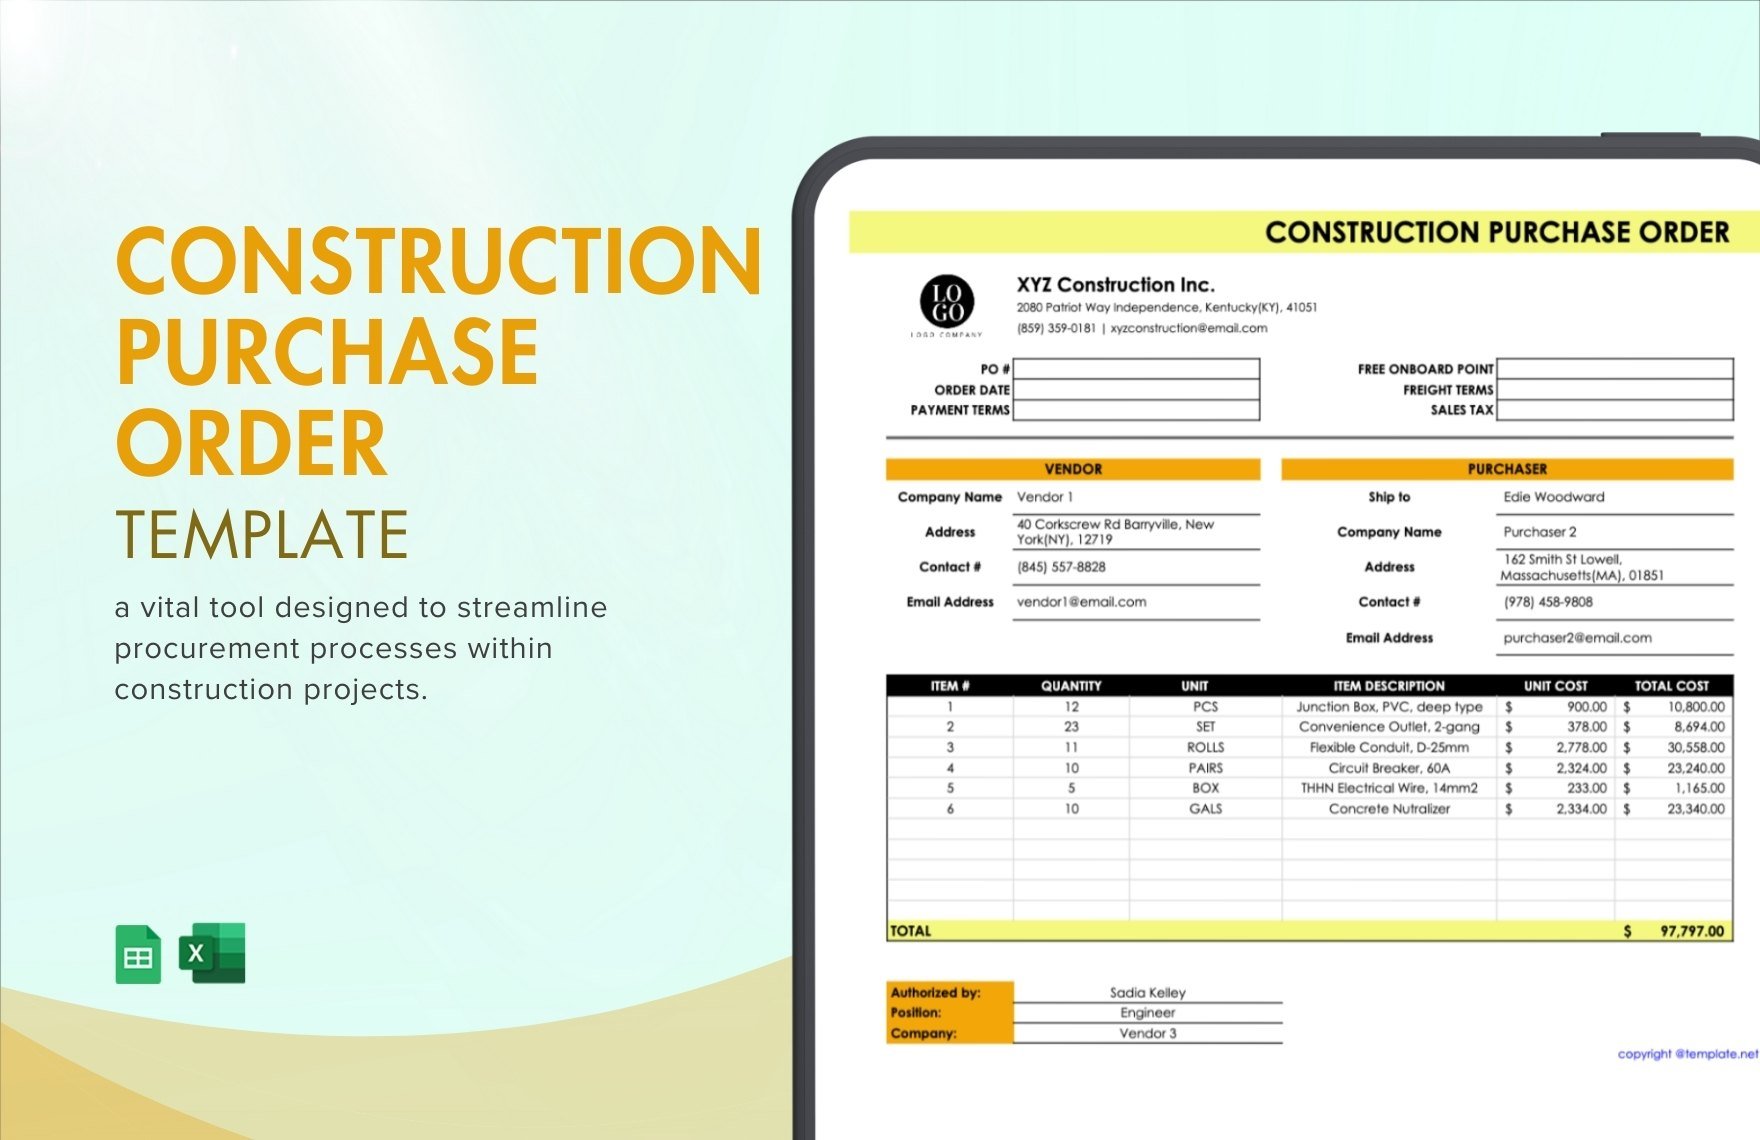 Construction Purchase Order Template in Excel, Google Sheets